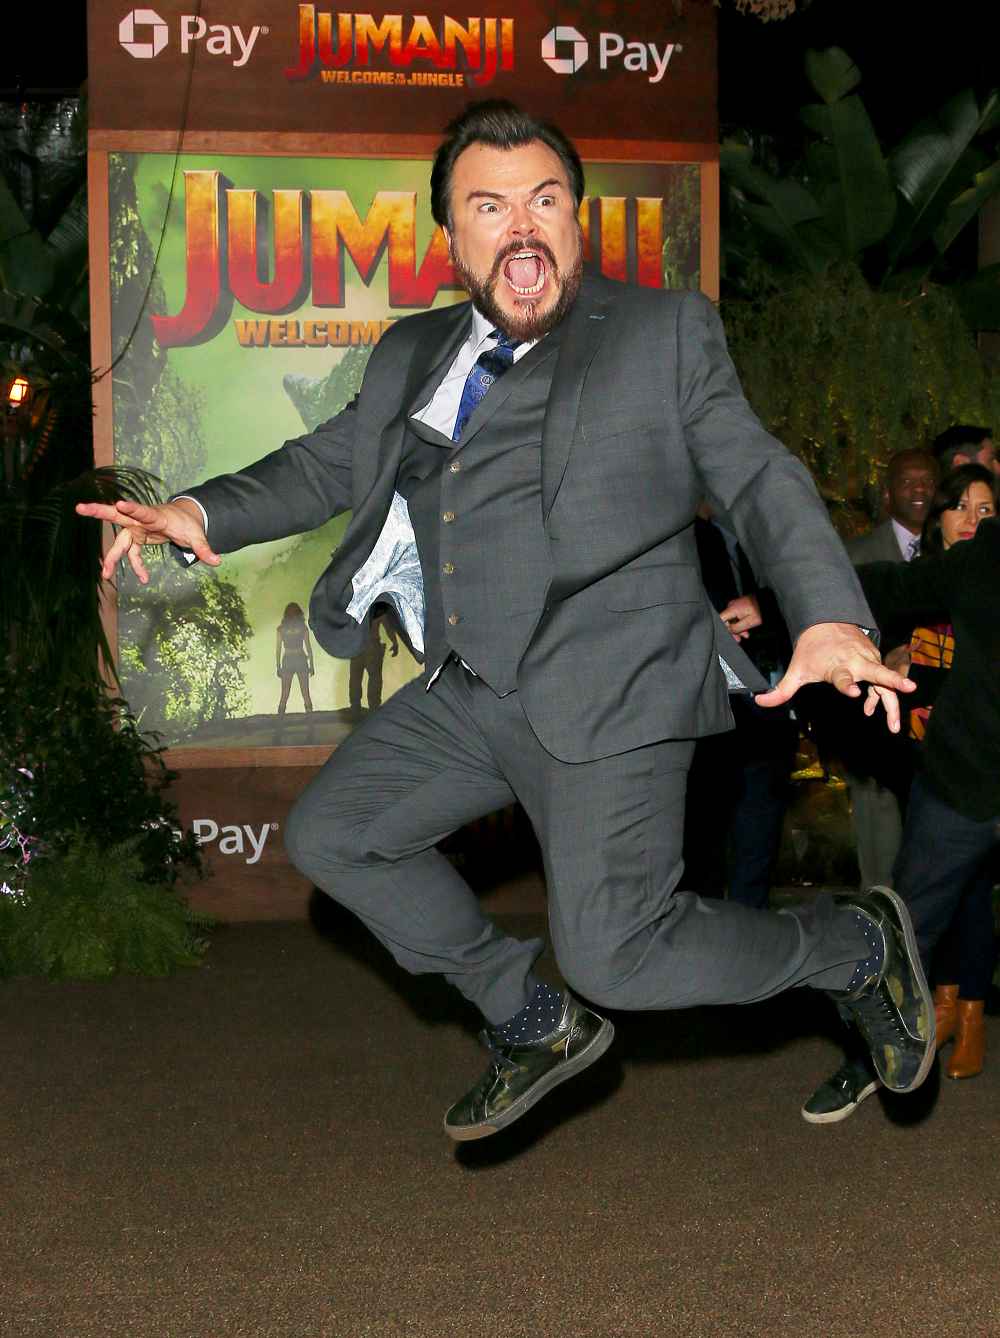 Jack Black attends the premiere of 'Jumanji: Welcome To The Jungle' on December 11, 2017 in Los Angeles, California.